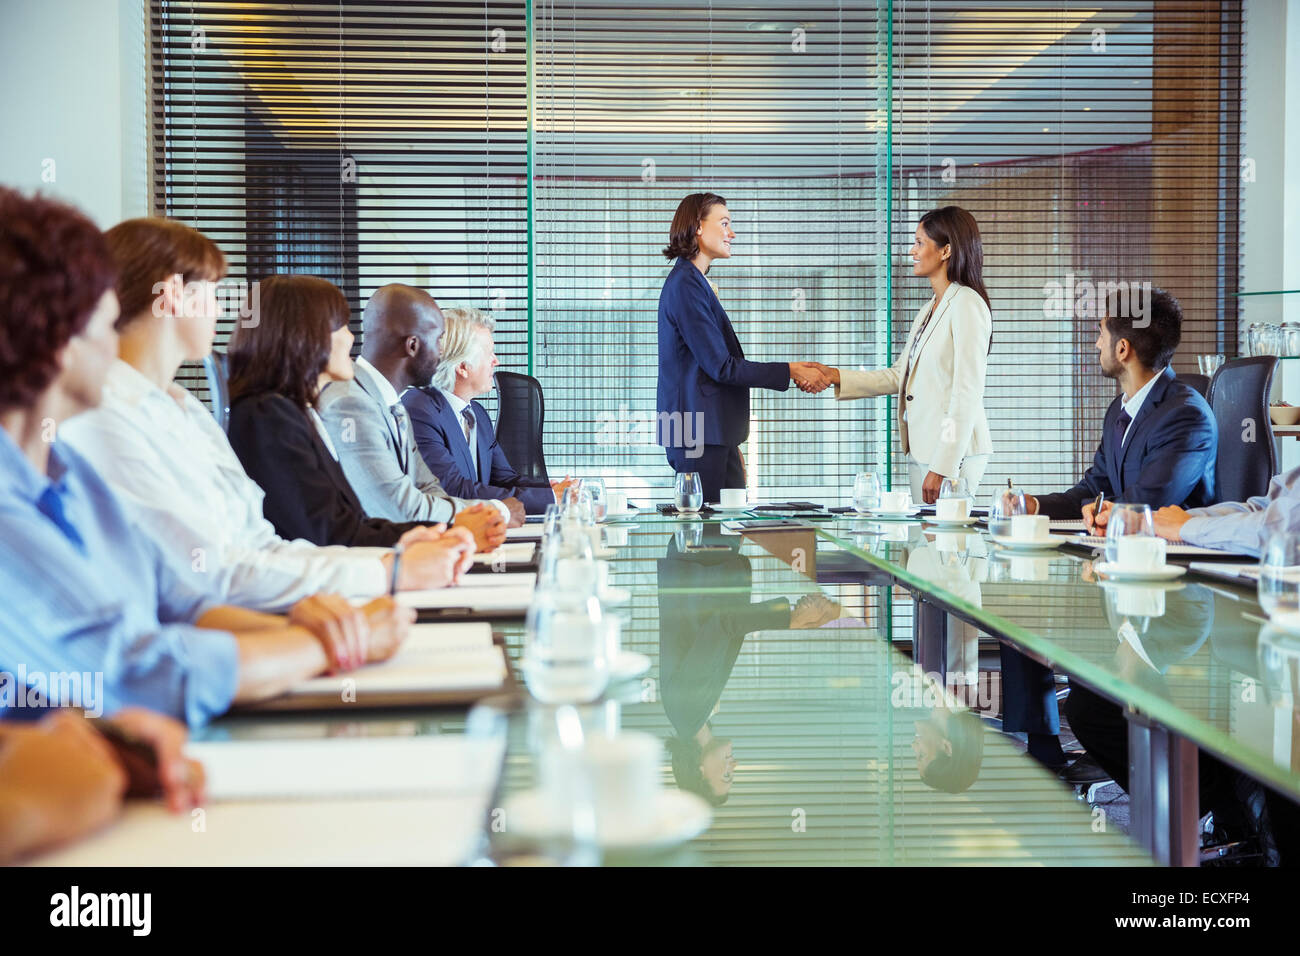 Two businesswomen shaking hands in conference room, colleagues watching Stock Photo